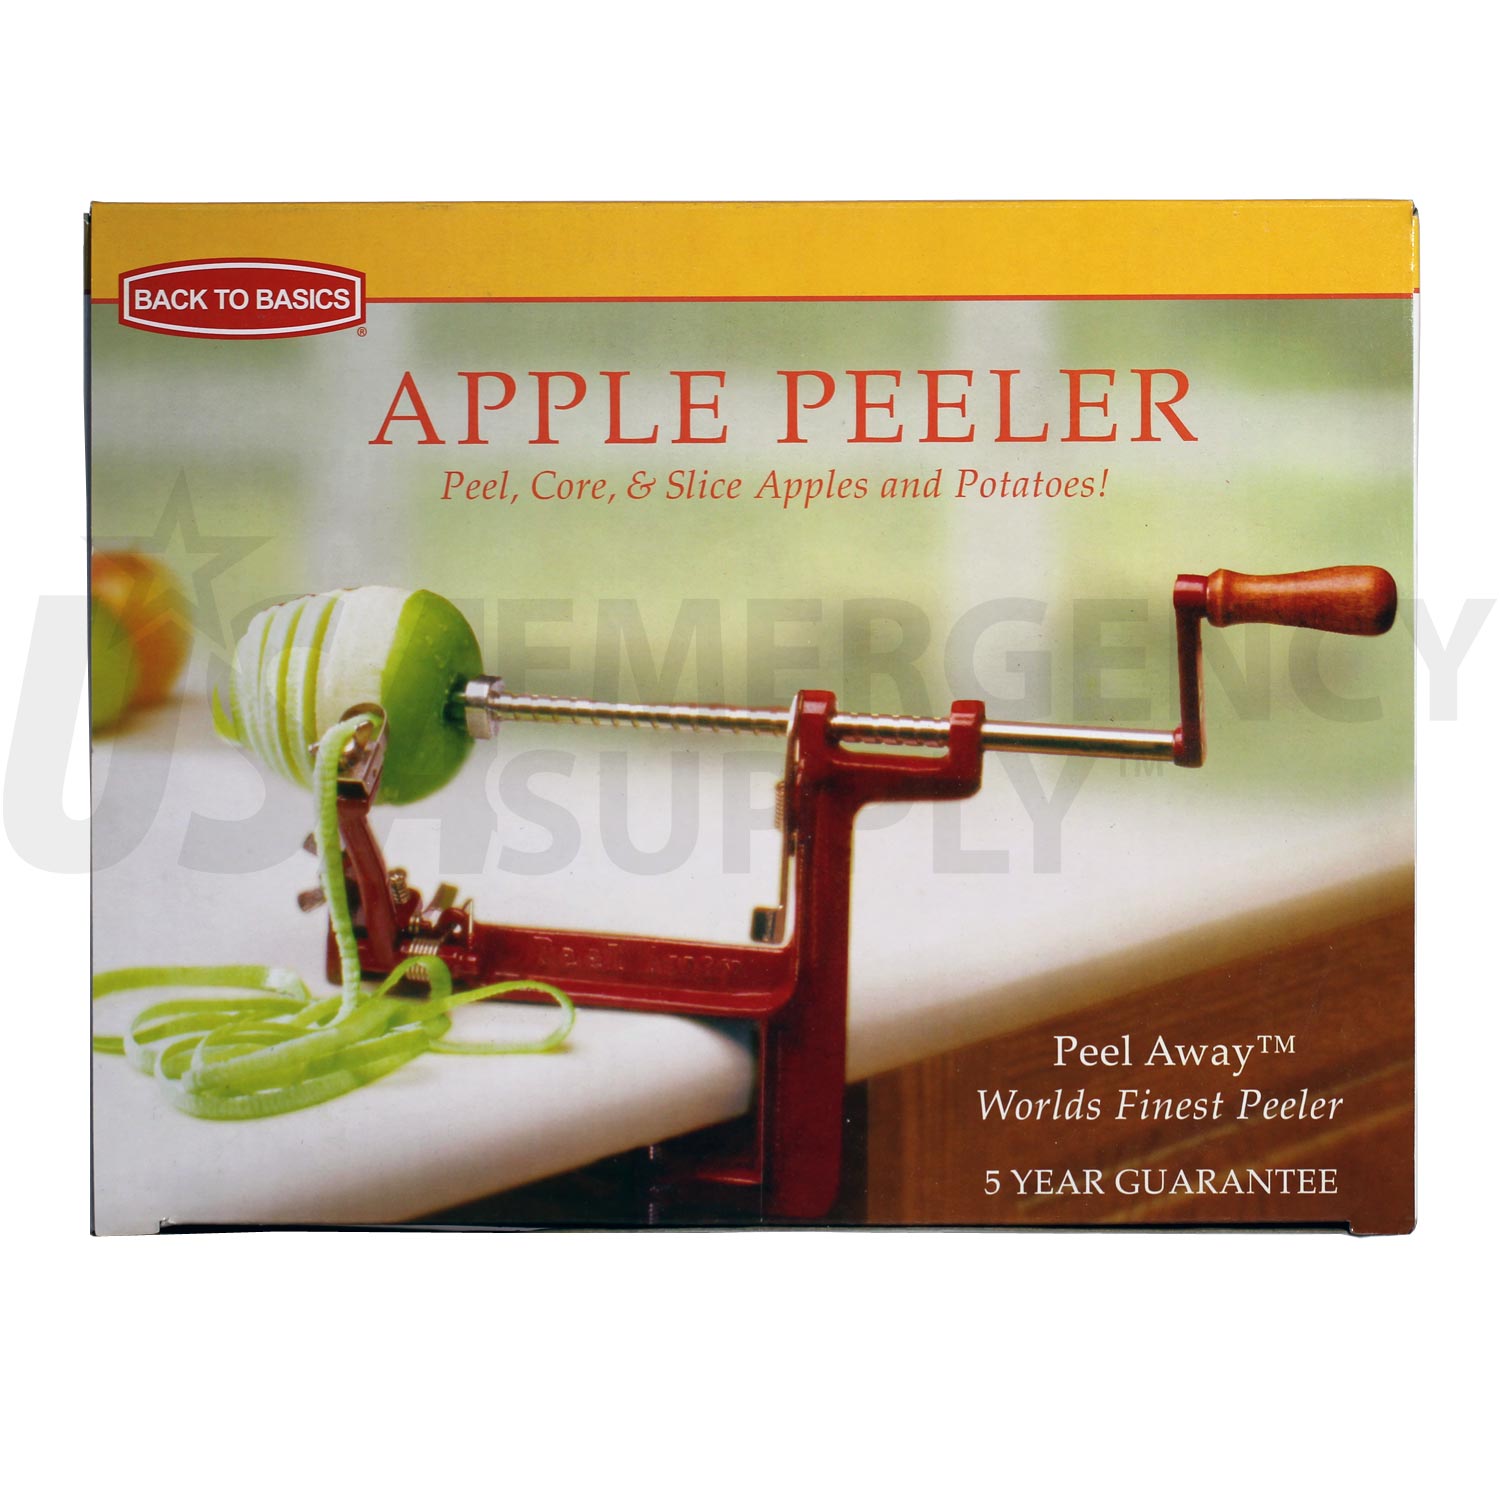 https://www.usaemergencysupply.com/media/img/products/lg/apple-peeler-red-with-table-clamp-a-lg.jpg